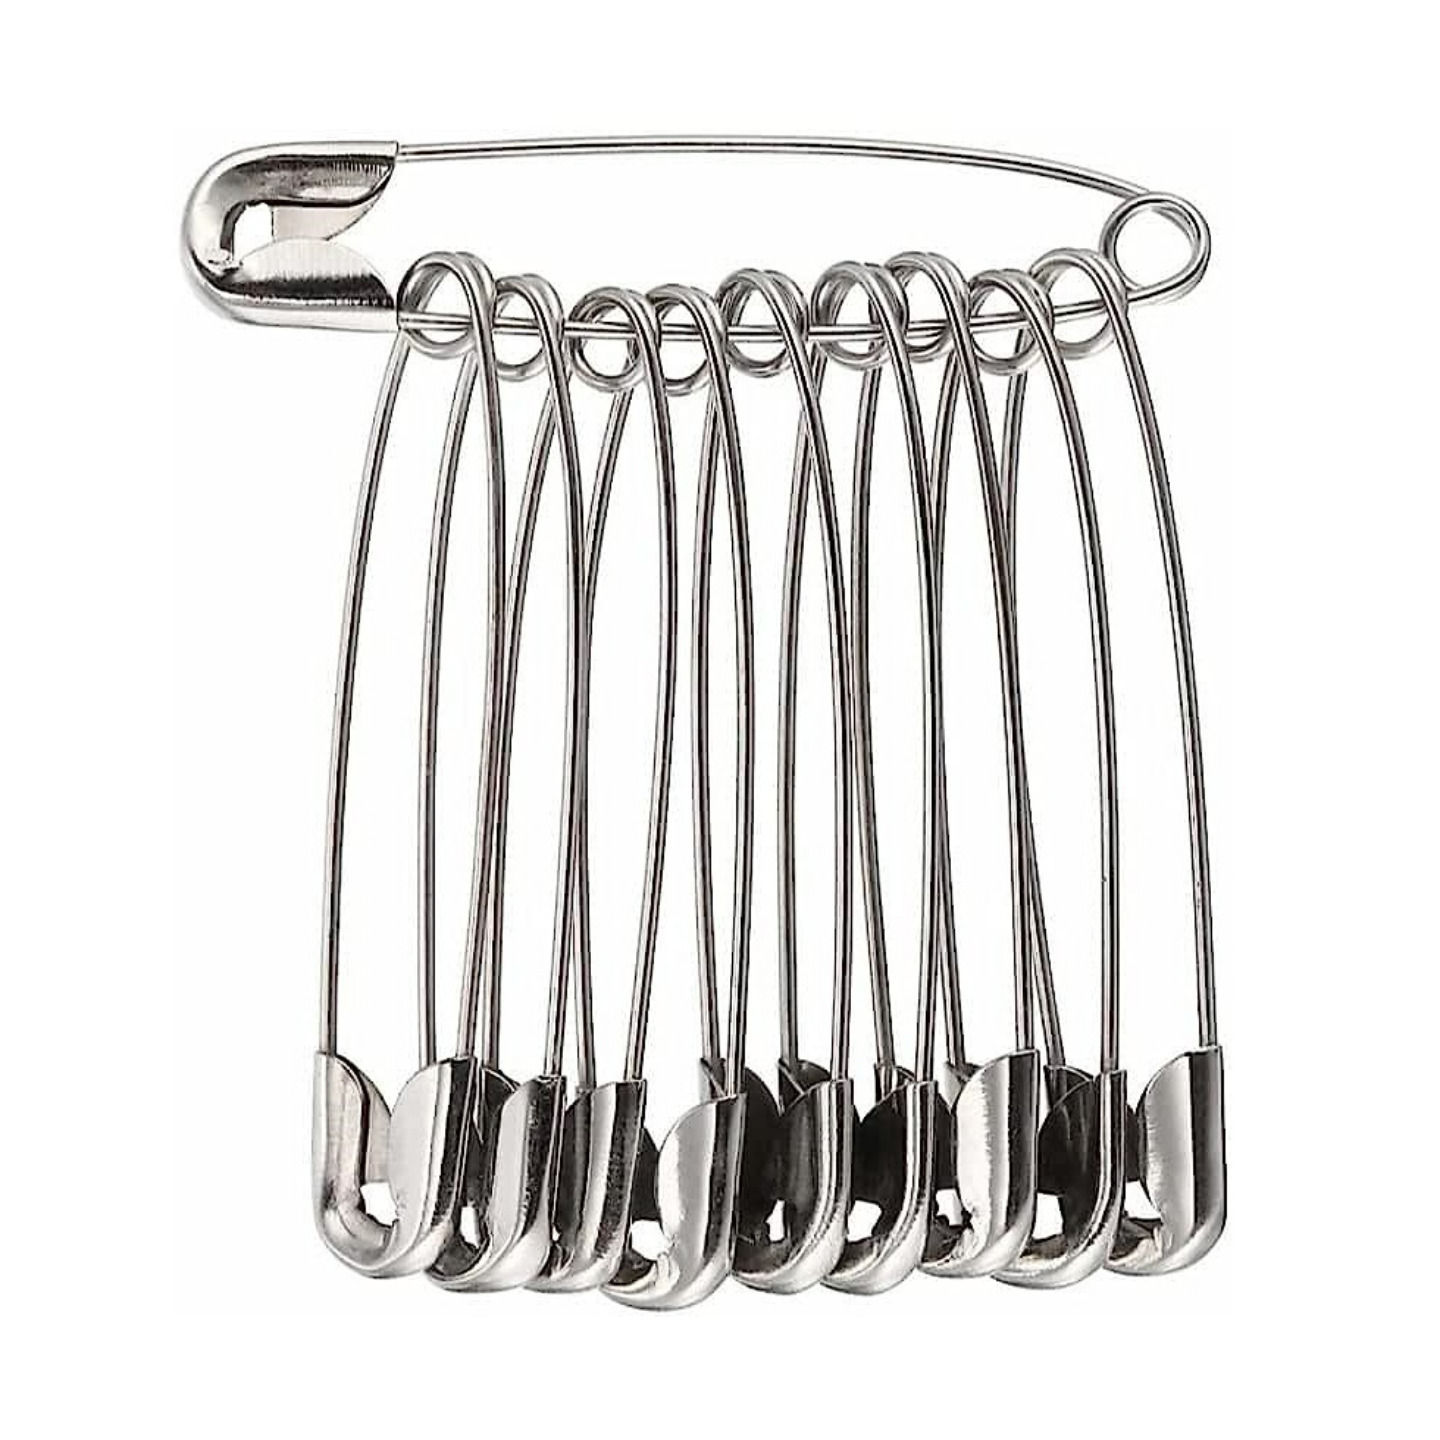 Konica Steel Safety Pins (set of 10)